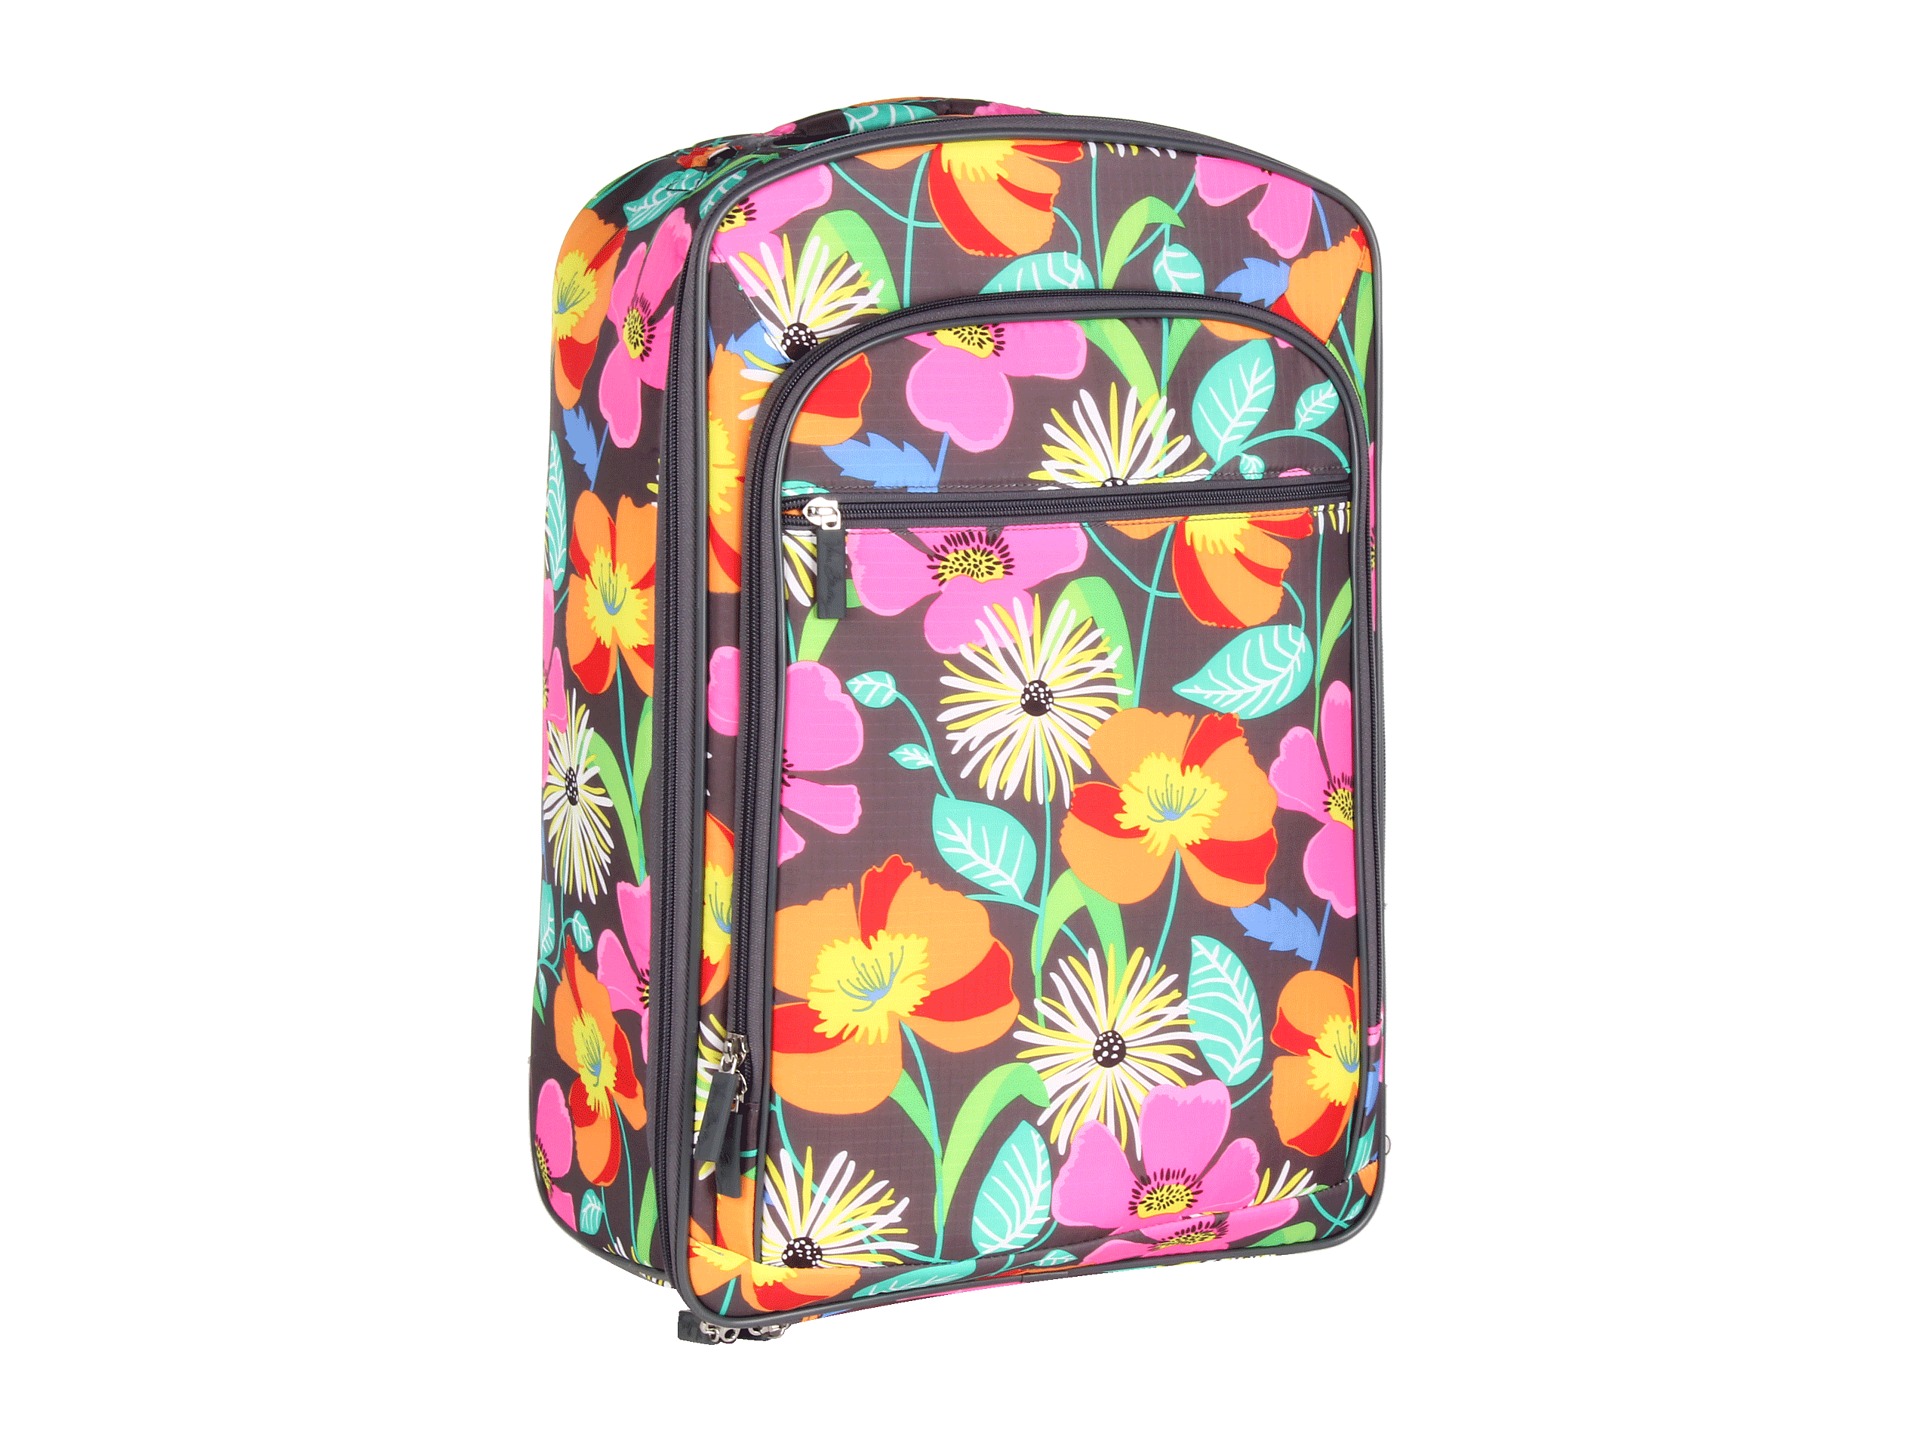 Vera Bradley Luggage 22 Rolling Carry On | Shipped Free at Zappos